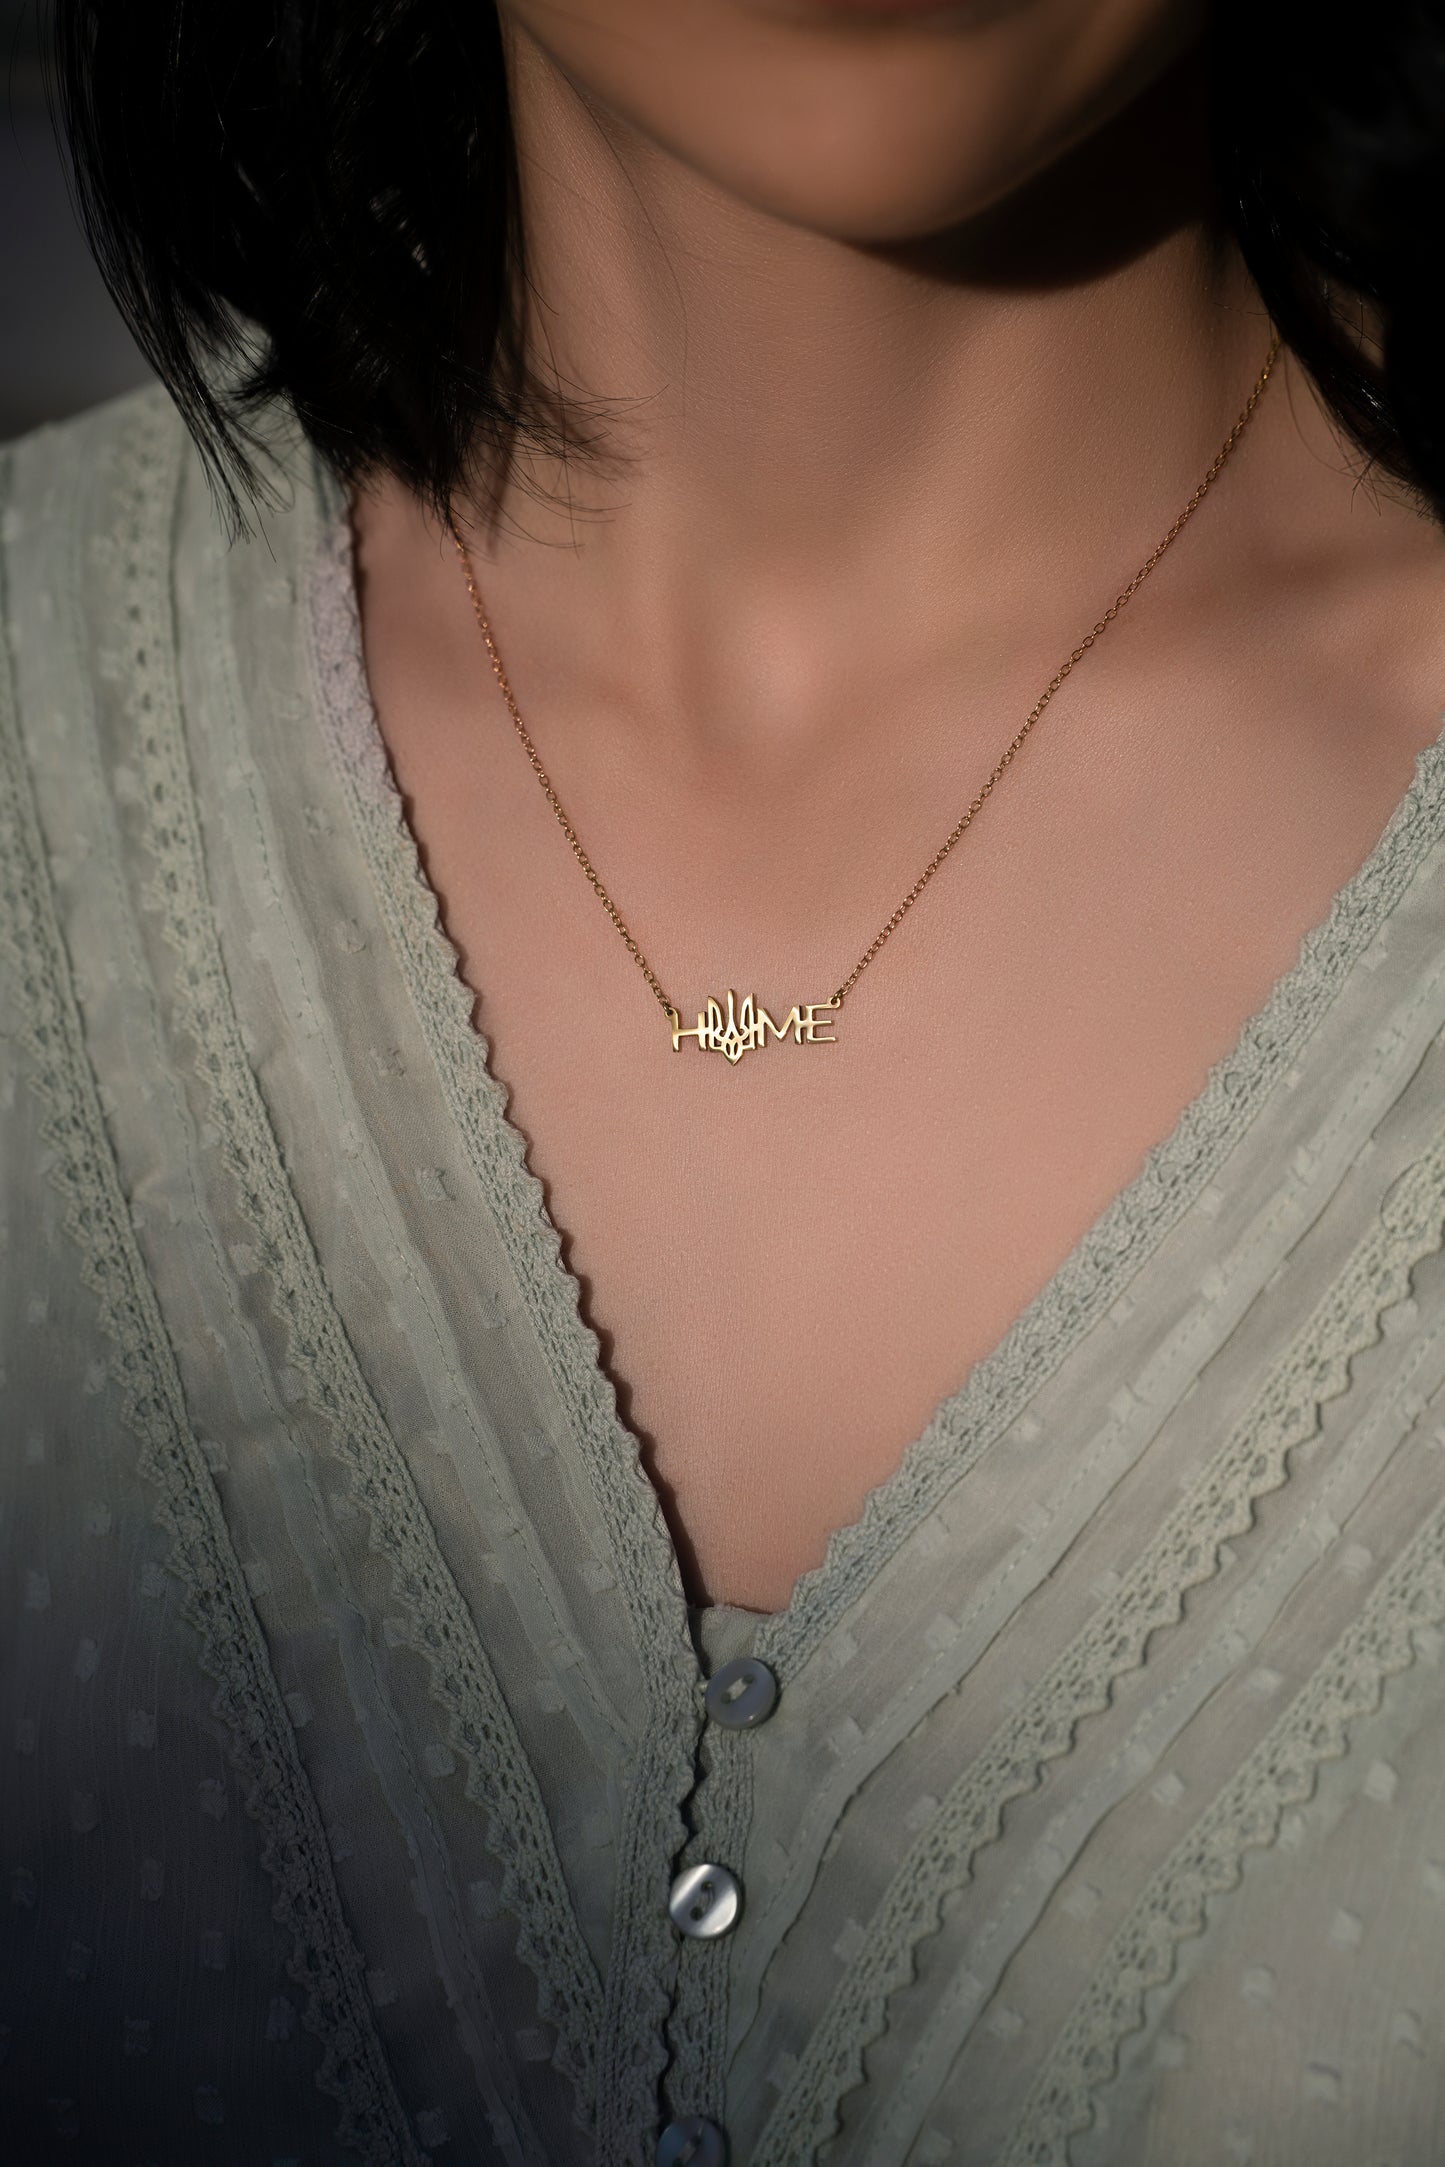 "Home" Necklace with Trident